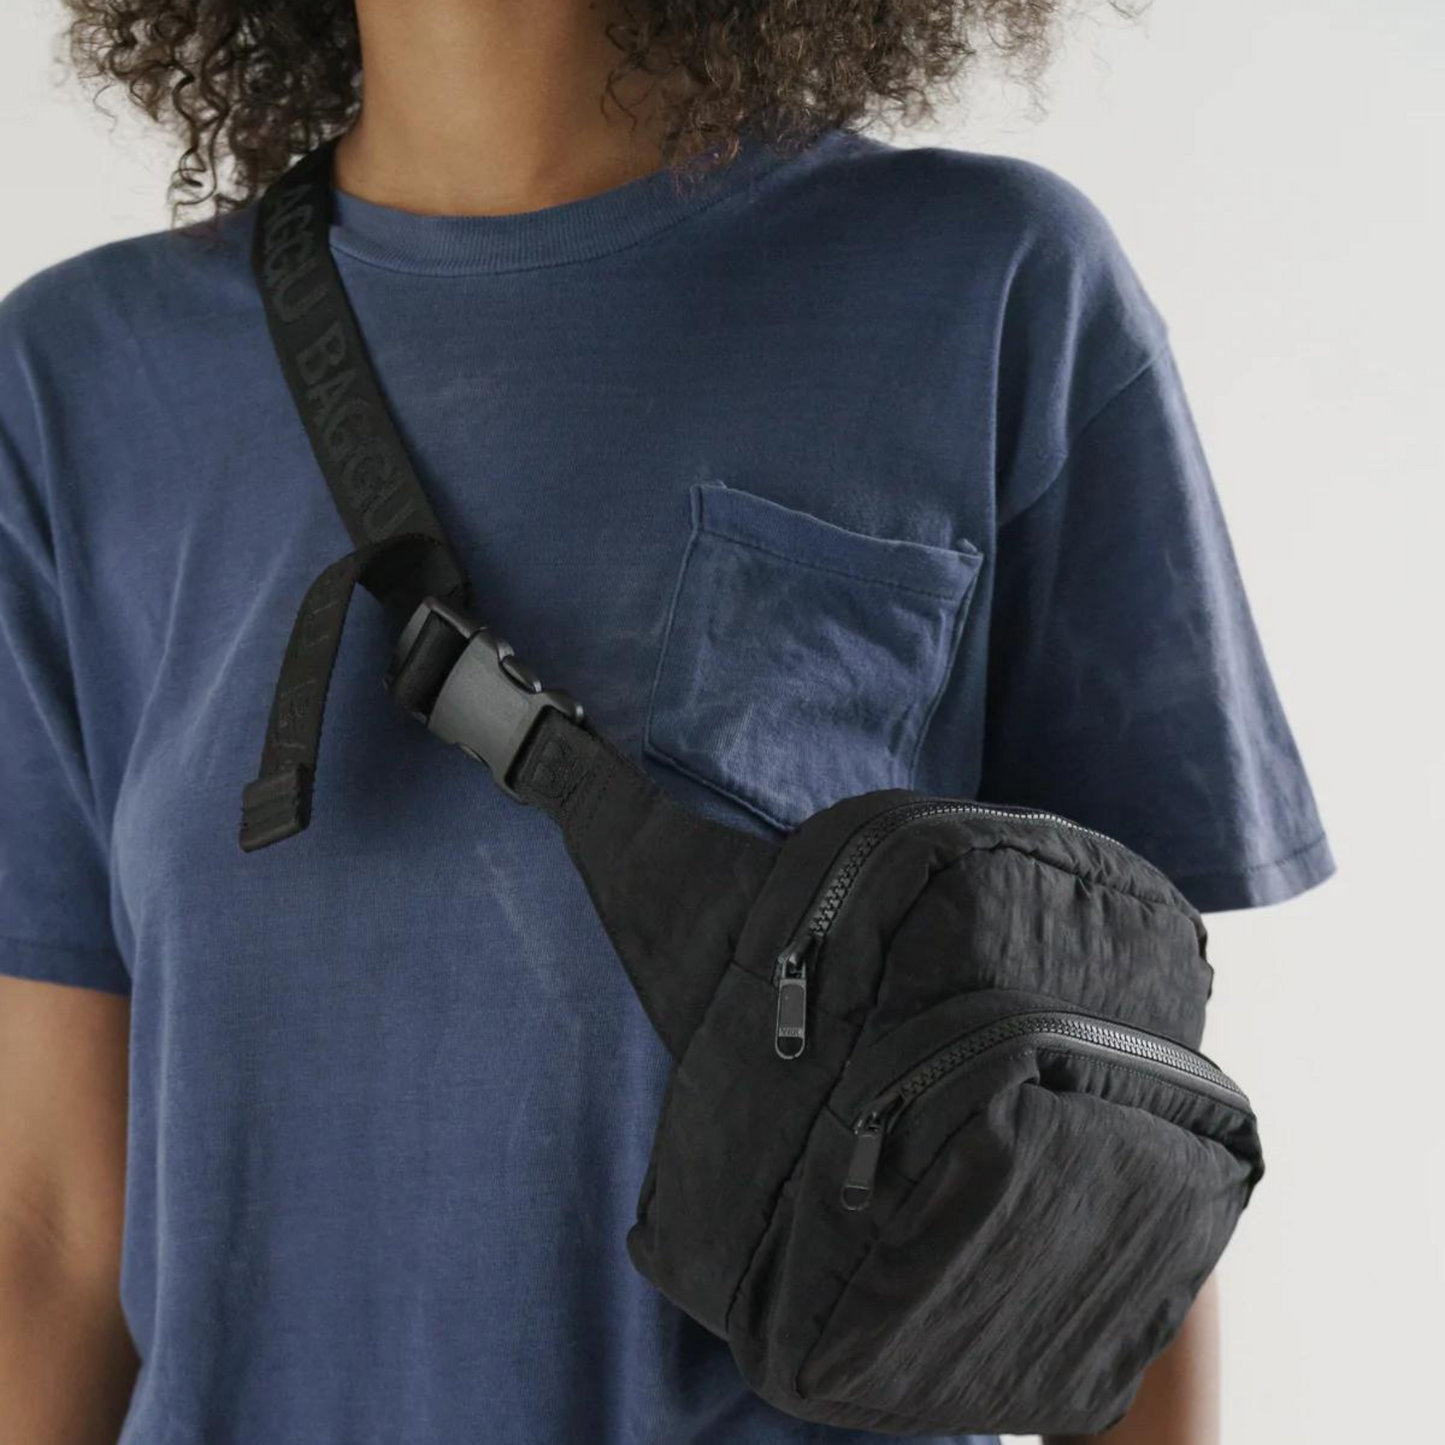 close up of person in a blue tee shirt wearing black fanny pack with two pockets and black strap with buckle